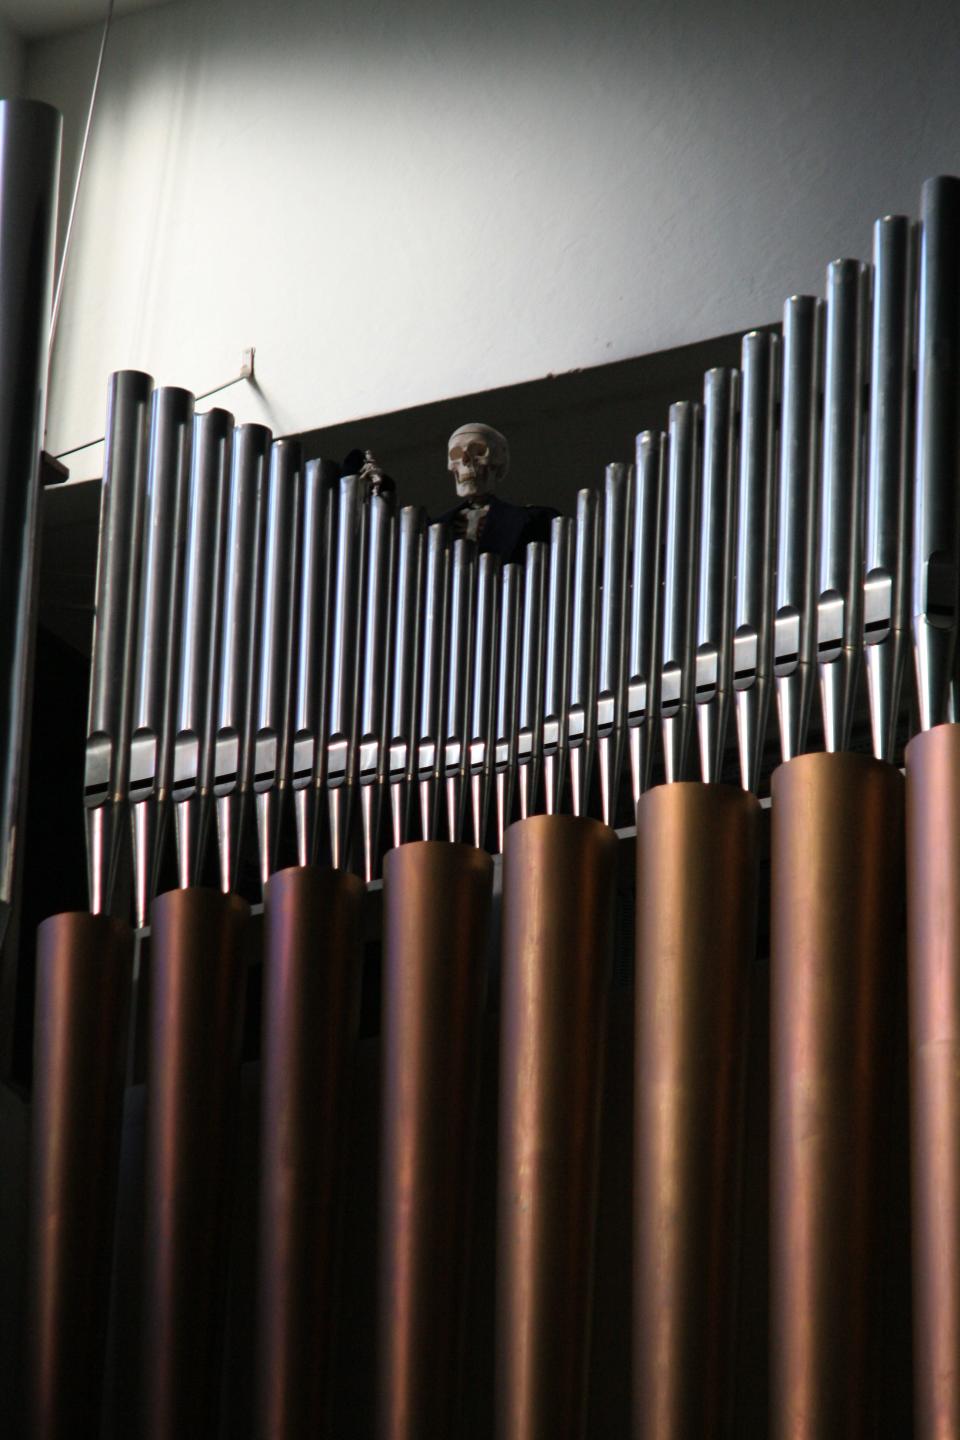 Skeleton atop pipe organ at Oslo City Hall in Norway